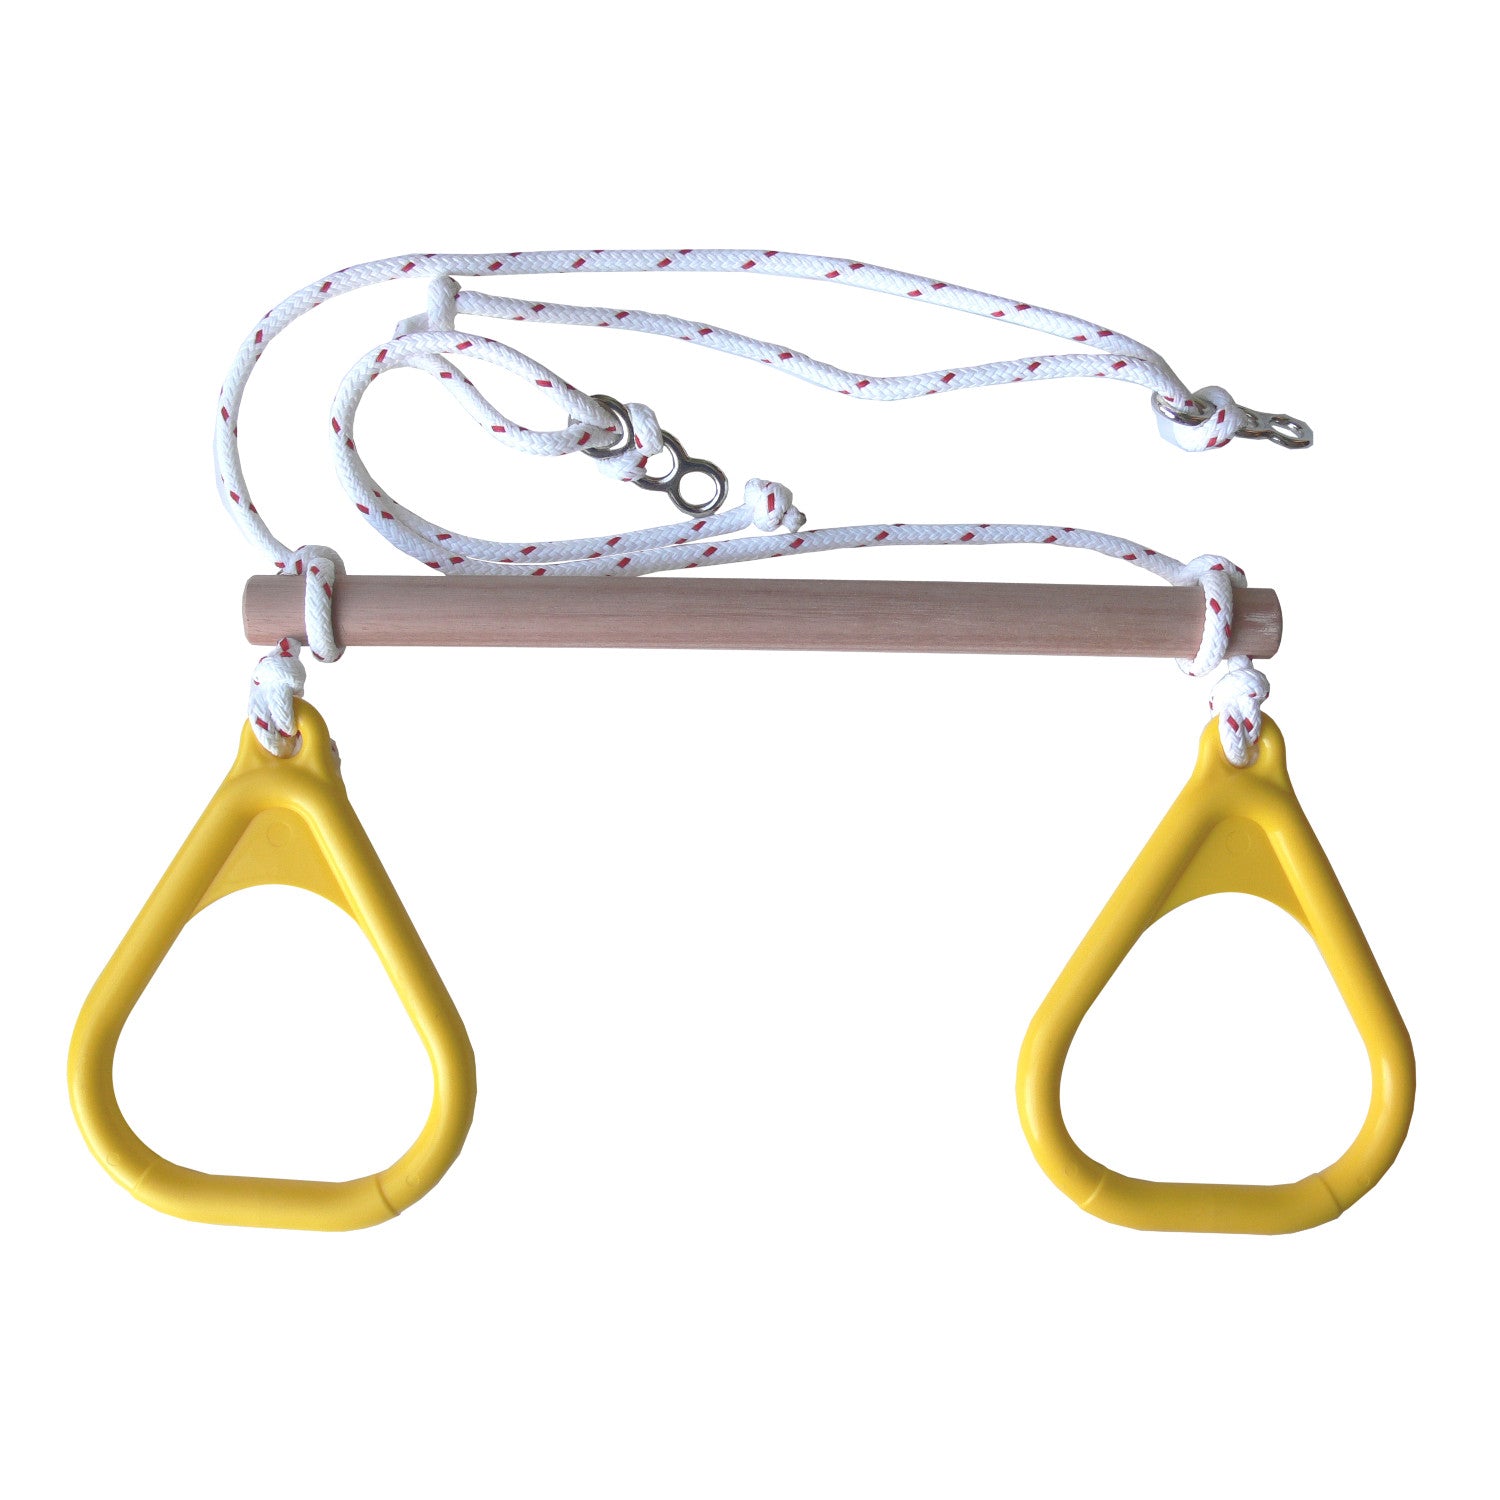 Gym Rings and Trapeze Bar Combo - Yellow - DreamGYM